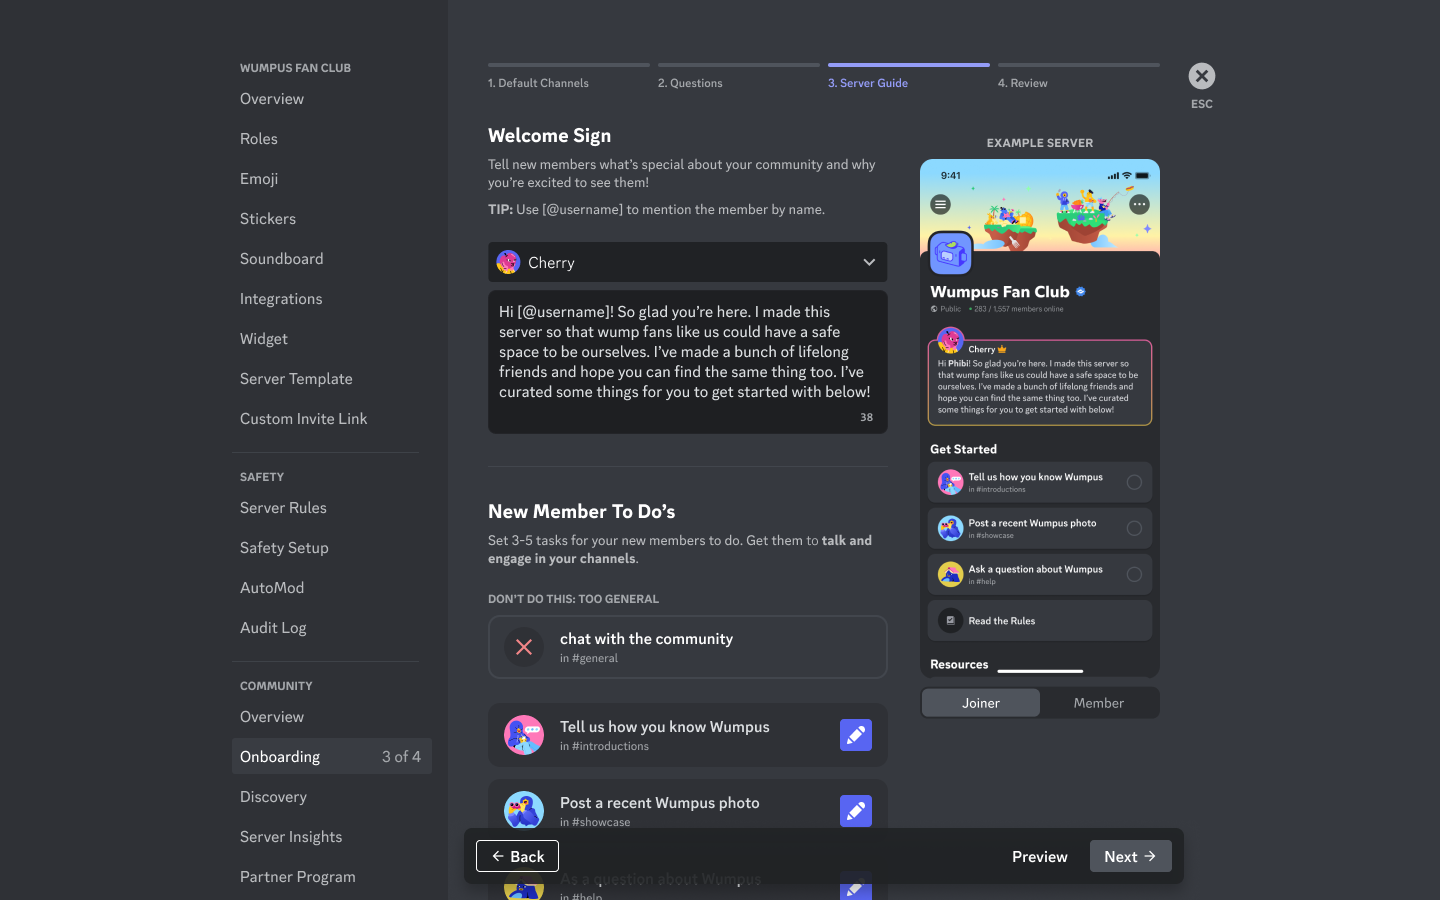 Manage and improve your discord server